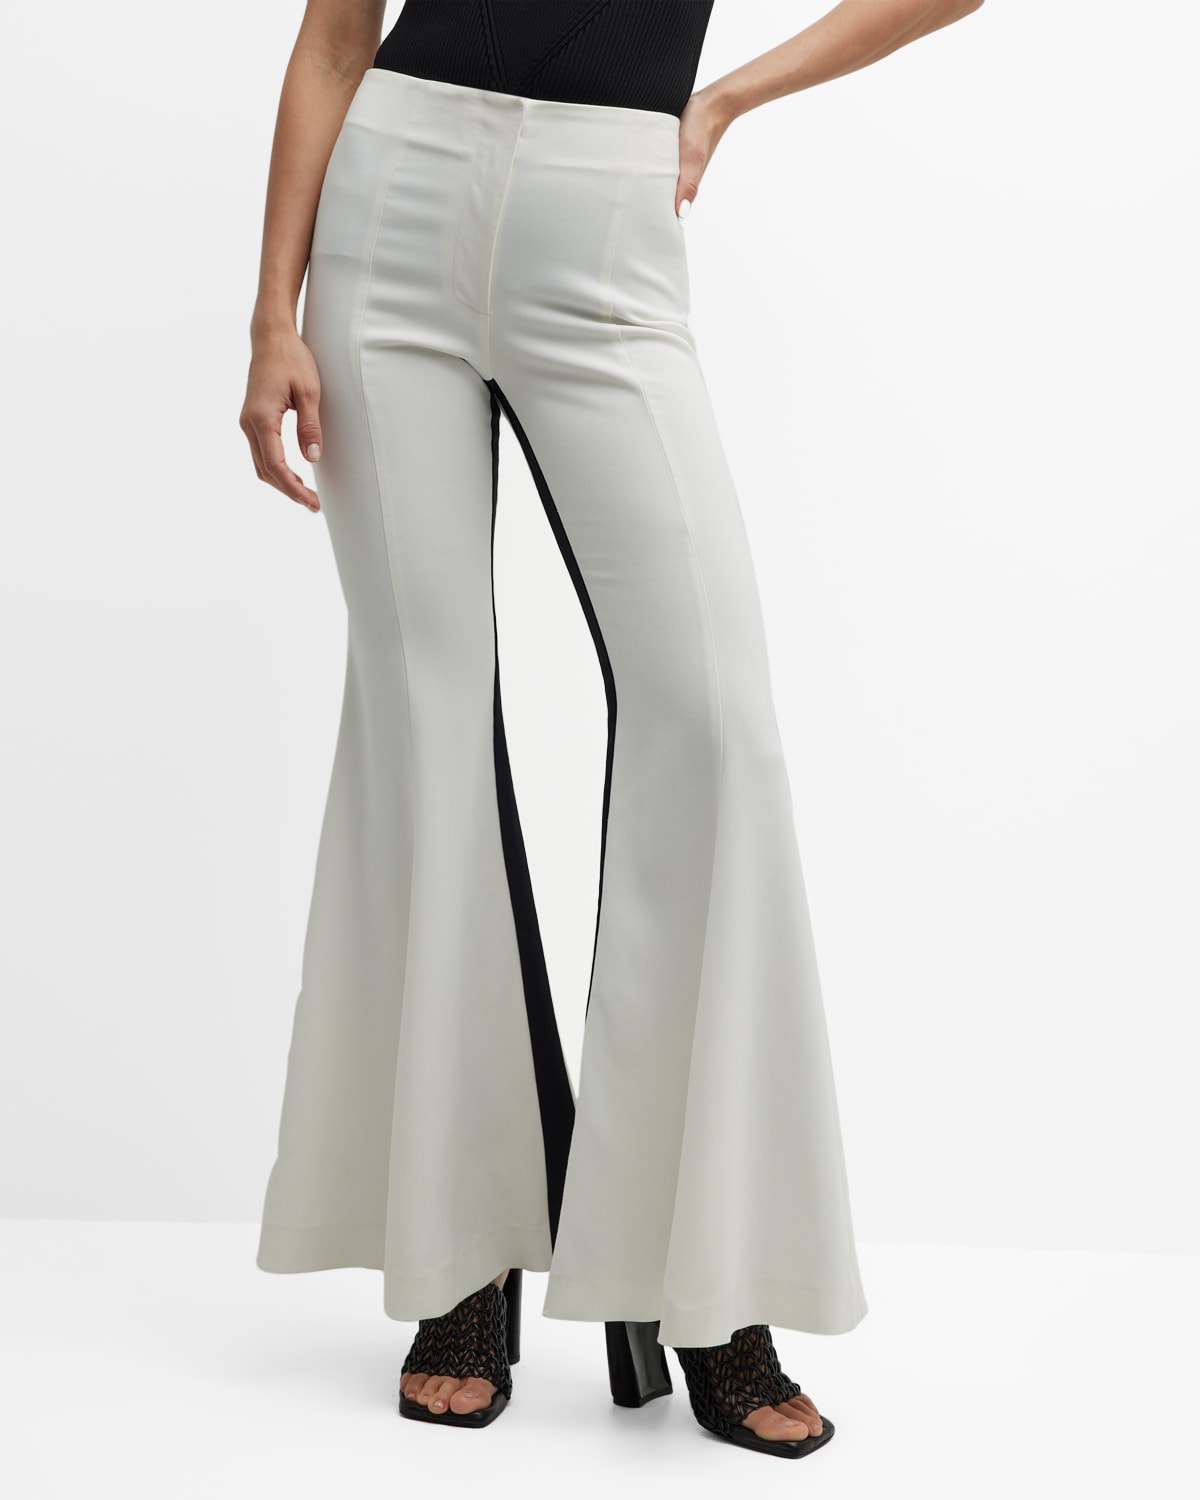 Proenza Schouler Suiting Tuxedo Wide-leg Pants With Contrast Seam Detail In Off White Multi